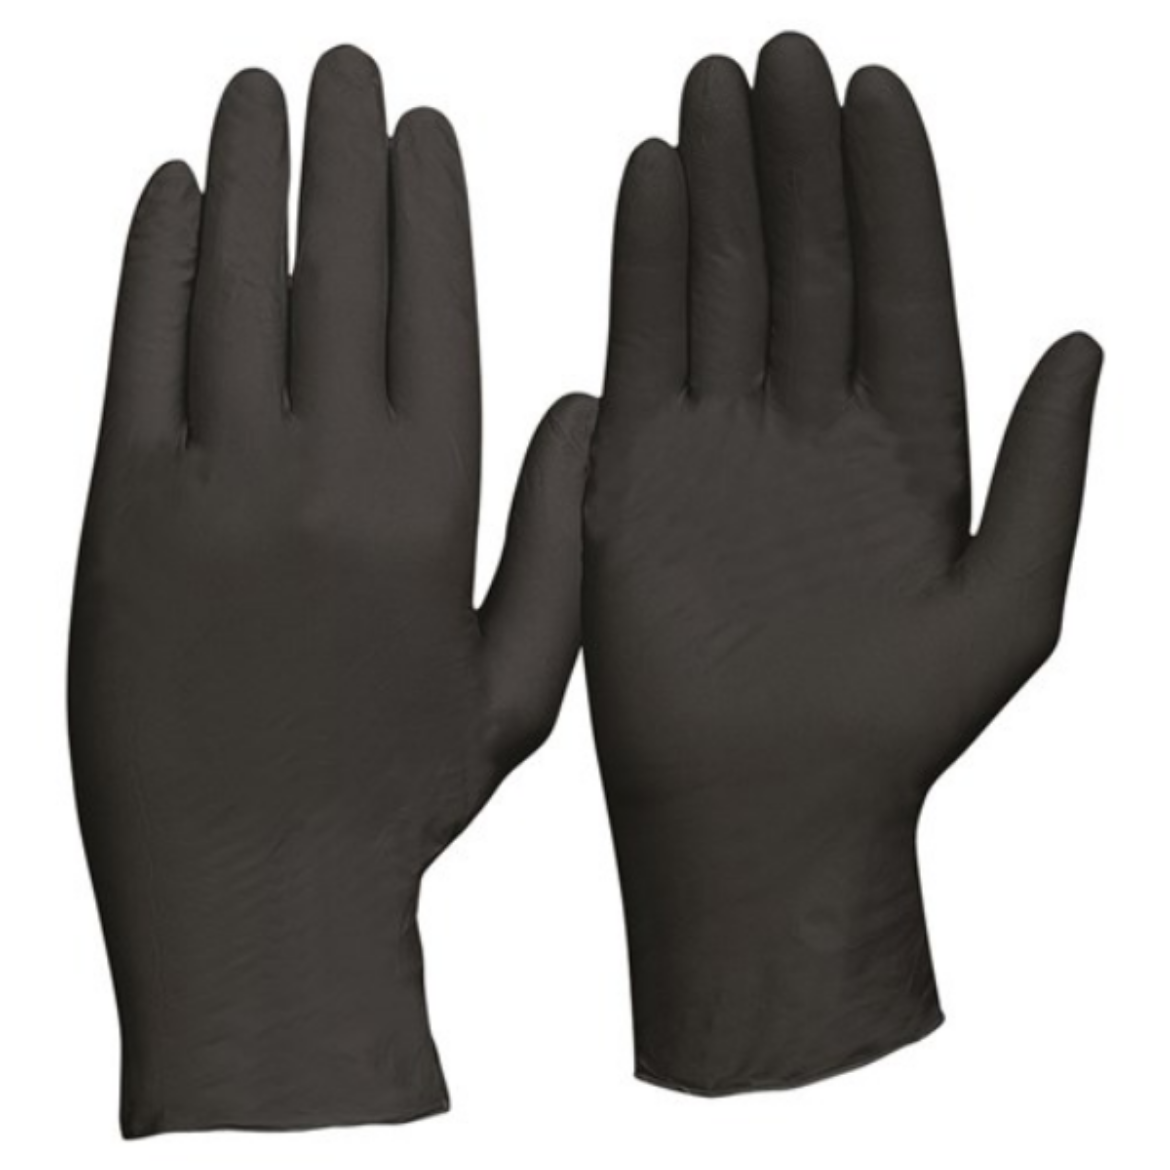 Picture of BLACK H/DUTY POWDER FREE GLOVES. AVAILABLE IN SIZES S/M/L/XL/2XL